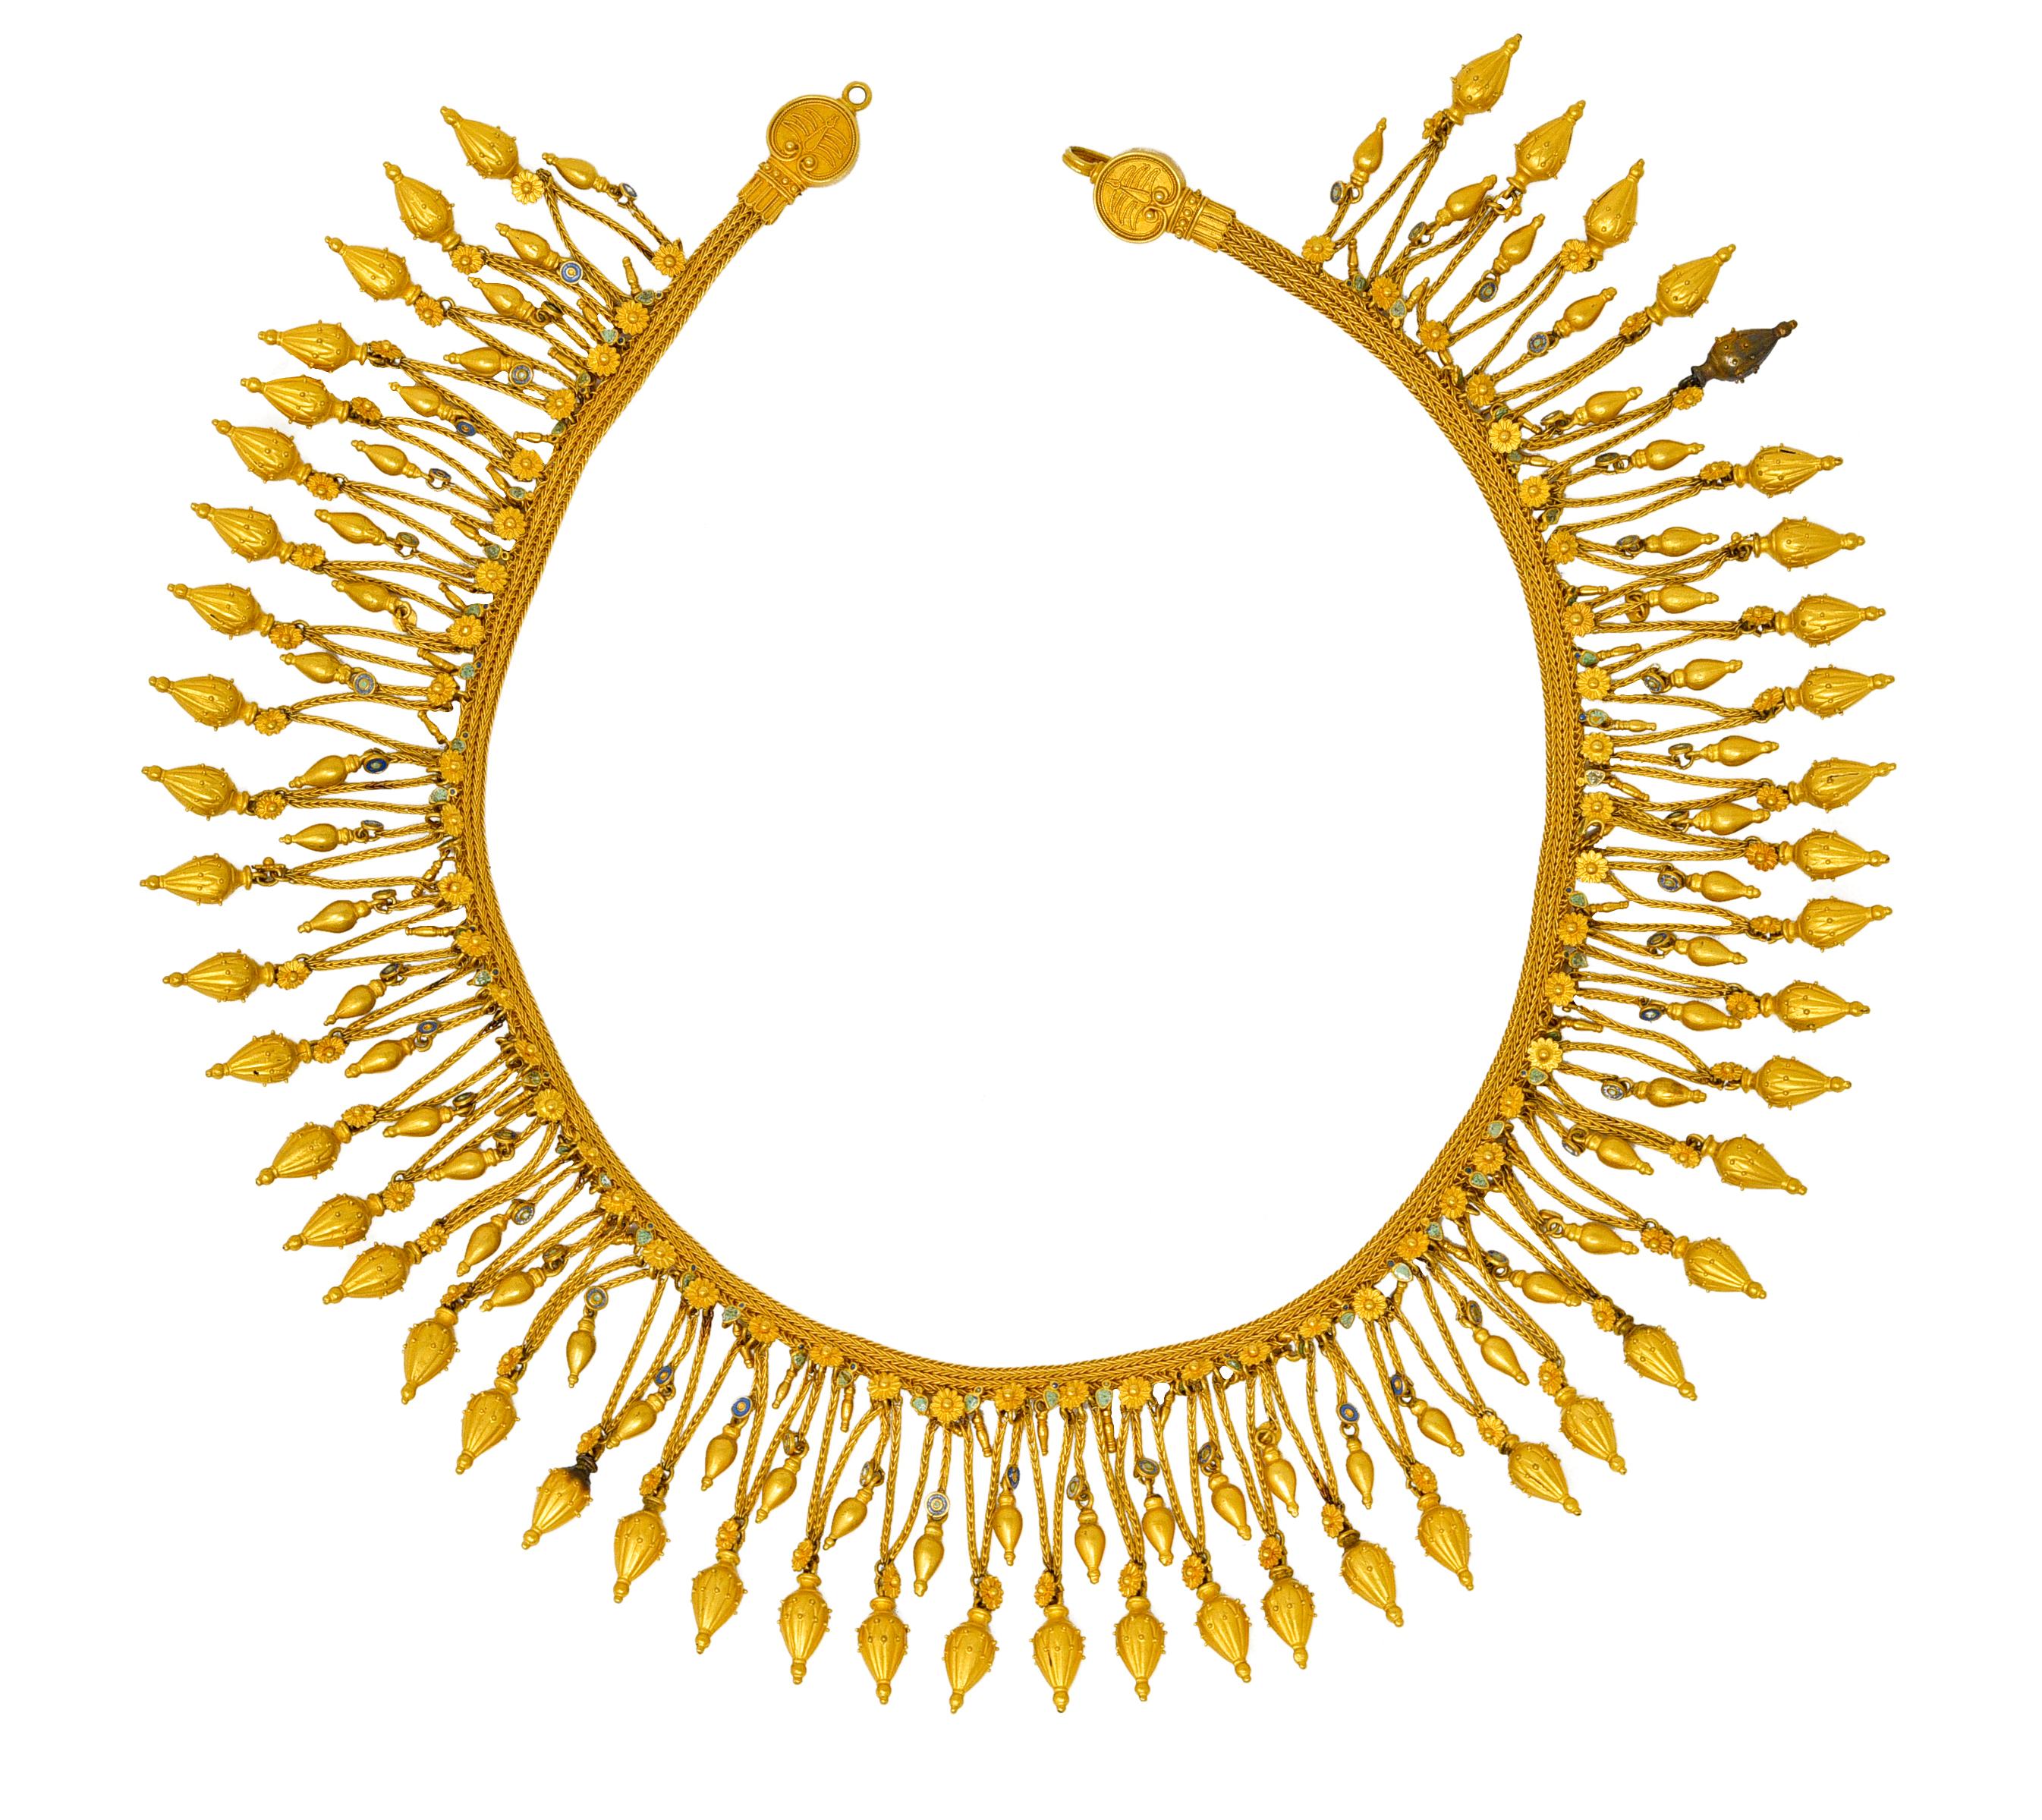 Melos choker necklace comprised of a woven wheat chain suspending three articulated tiers of drops, graduating in size, with floral and gold bead details

Accented throughout by blue and green enamel elements

With a rich matte gold